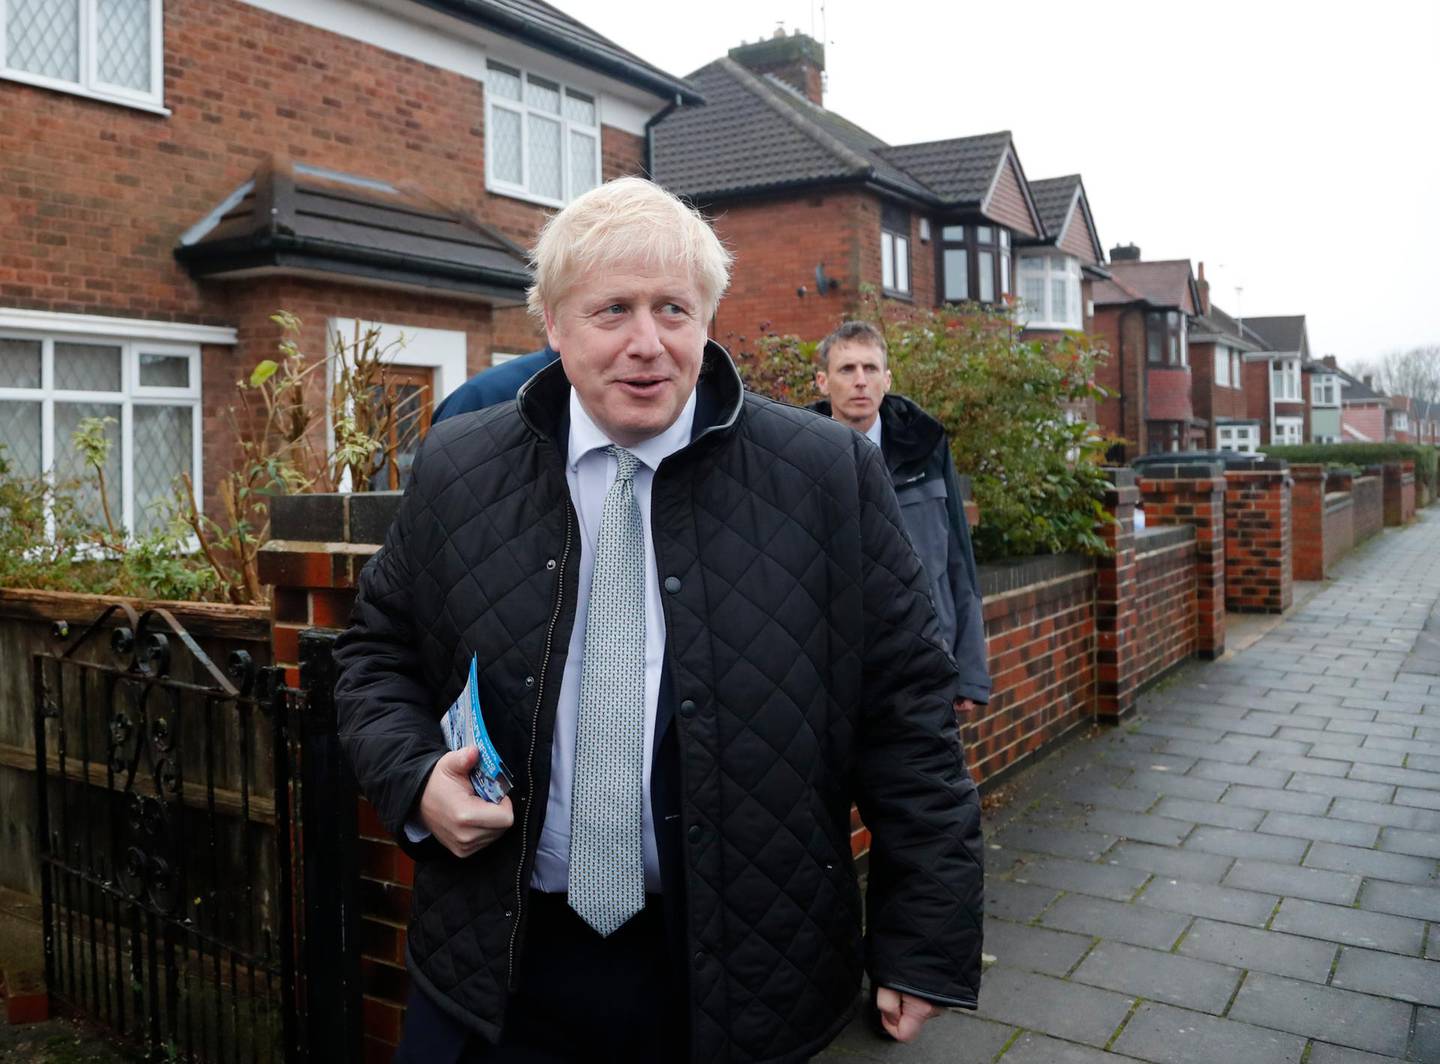 Britain's Prime Minister Boris Johnson, right with the Conservative party candidate for the Mansfield constituency Ben Bradley, second right canvasing during a General Election campaign trail stop in Mansfield, England, Saturday, Nov. 16, 2019. Britain goes to the polls on Dec.12. (AP Photo/Frank Augstein, Pool)